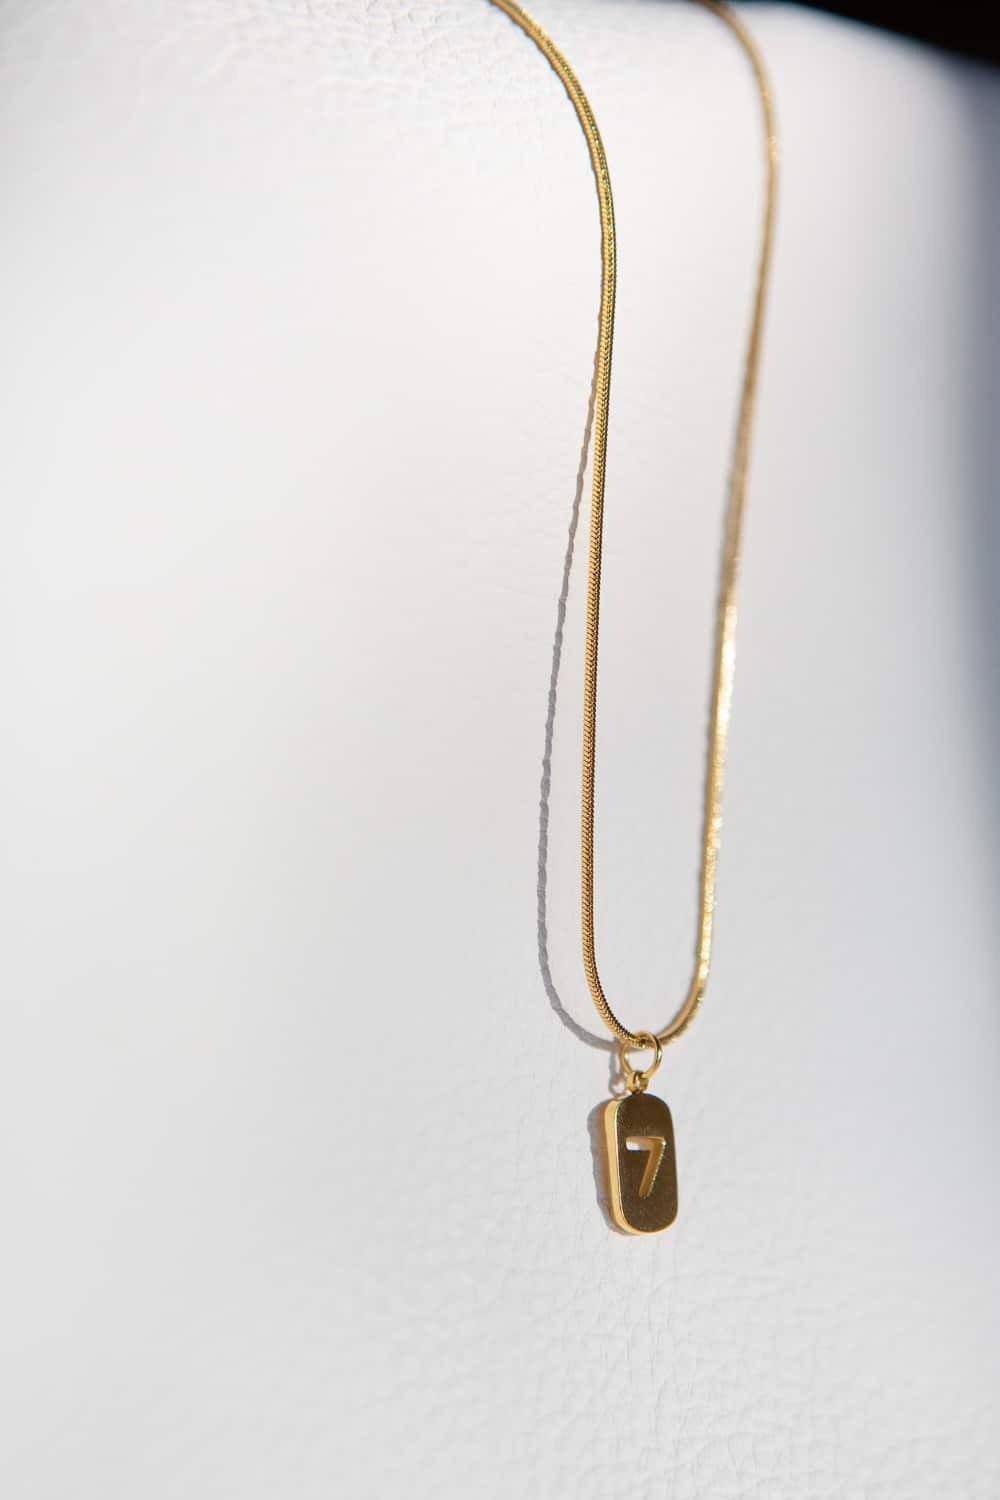 Gold Lucky Number Seven Necklace